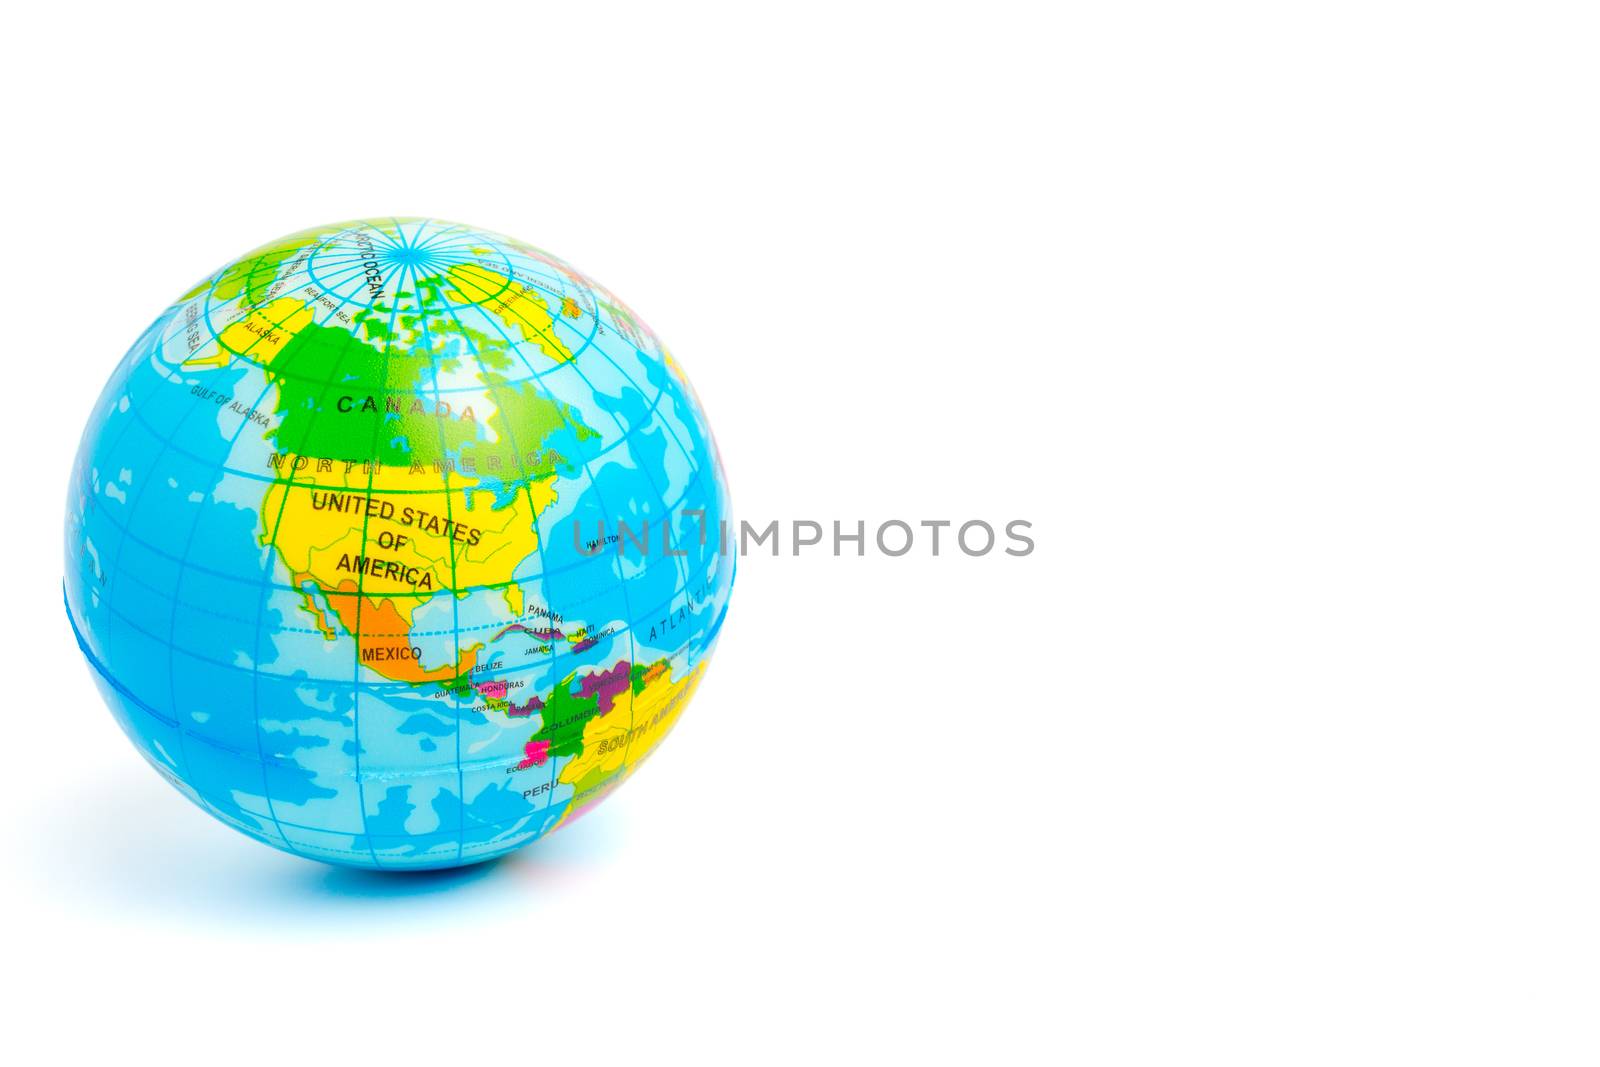 Chiang Mai , Thailand - Aug 9 : Studio shot of Simulated world isolated on white background on August 9 , 2017 in Chiang Mai, Thailand